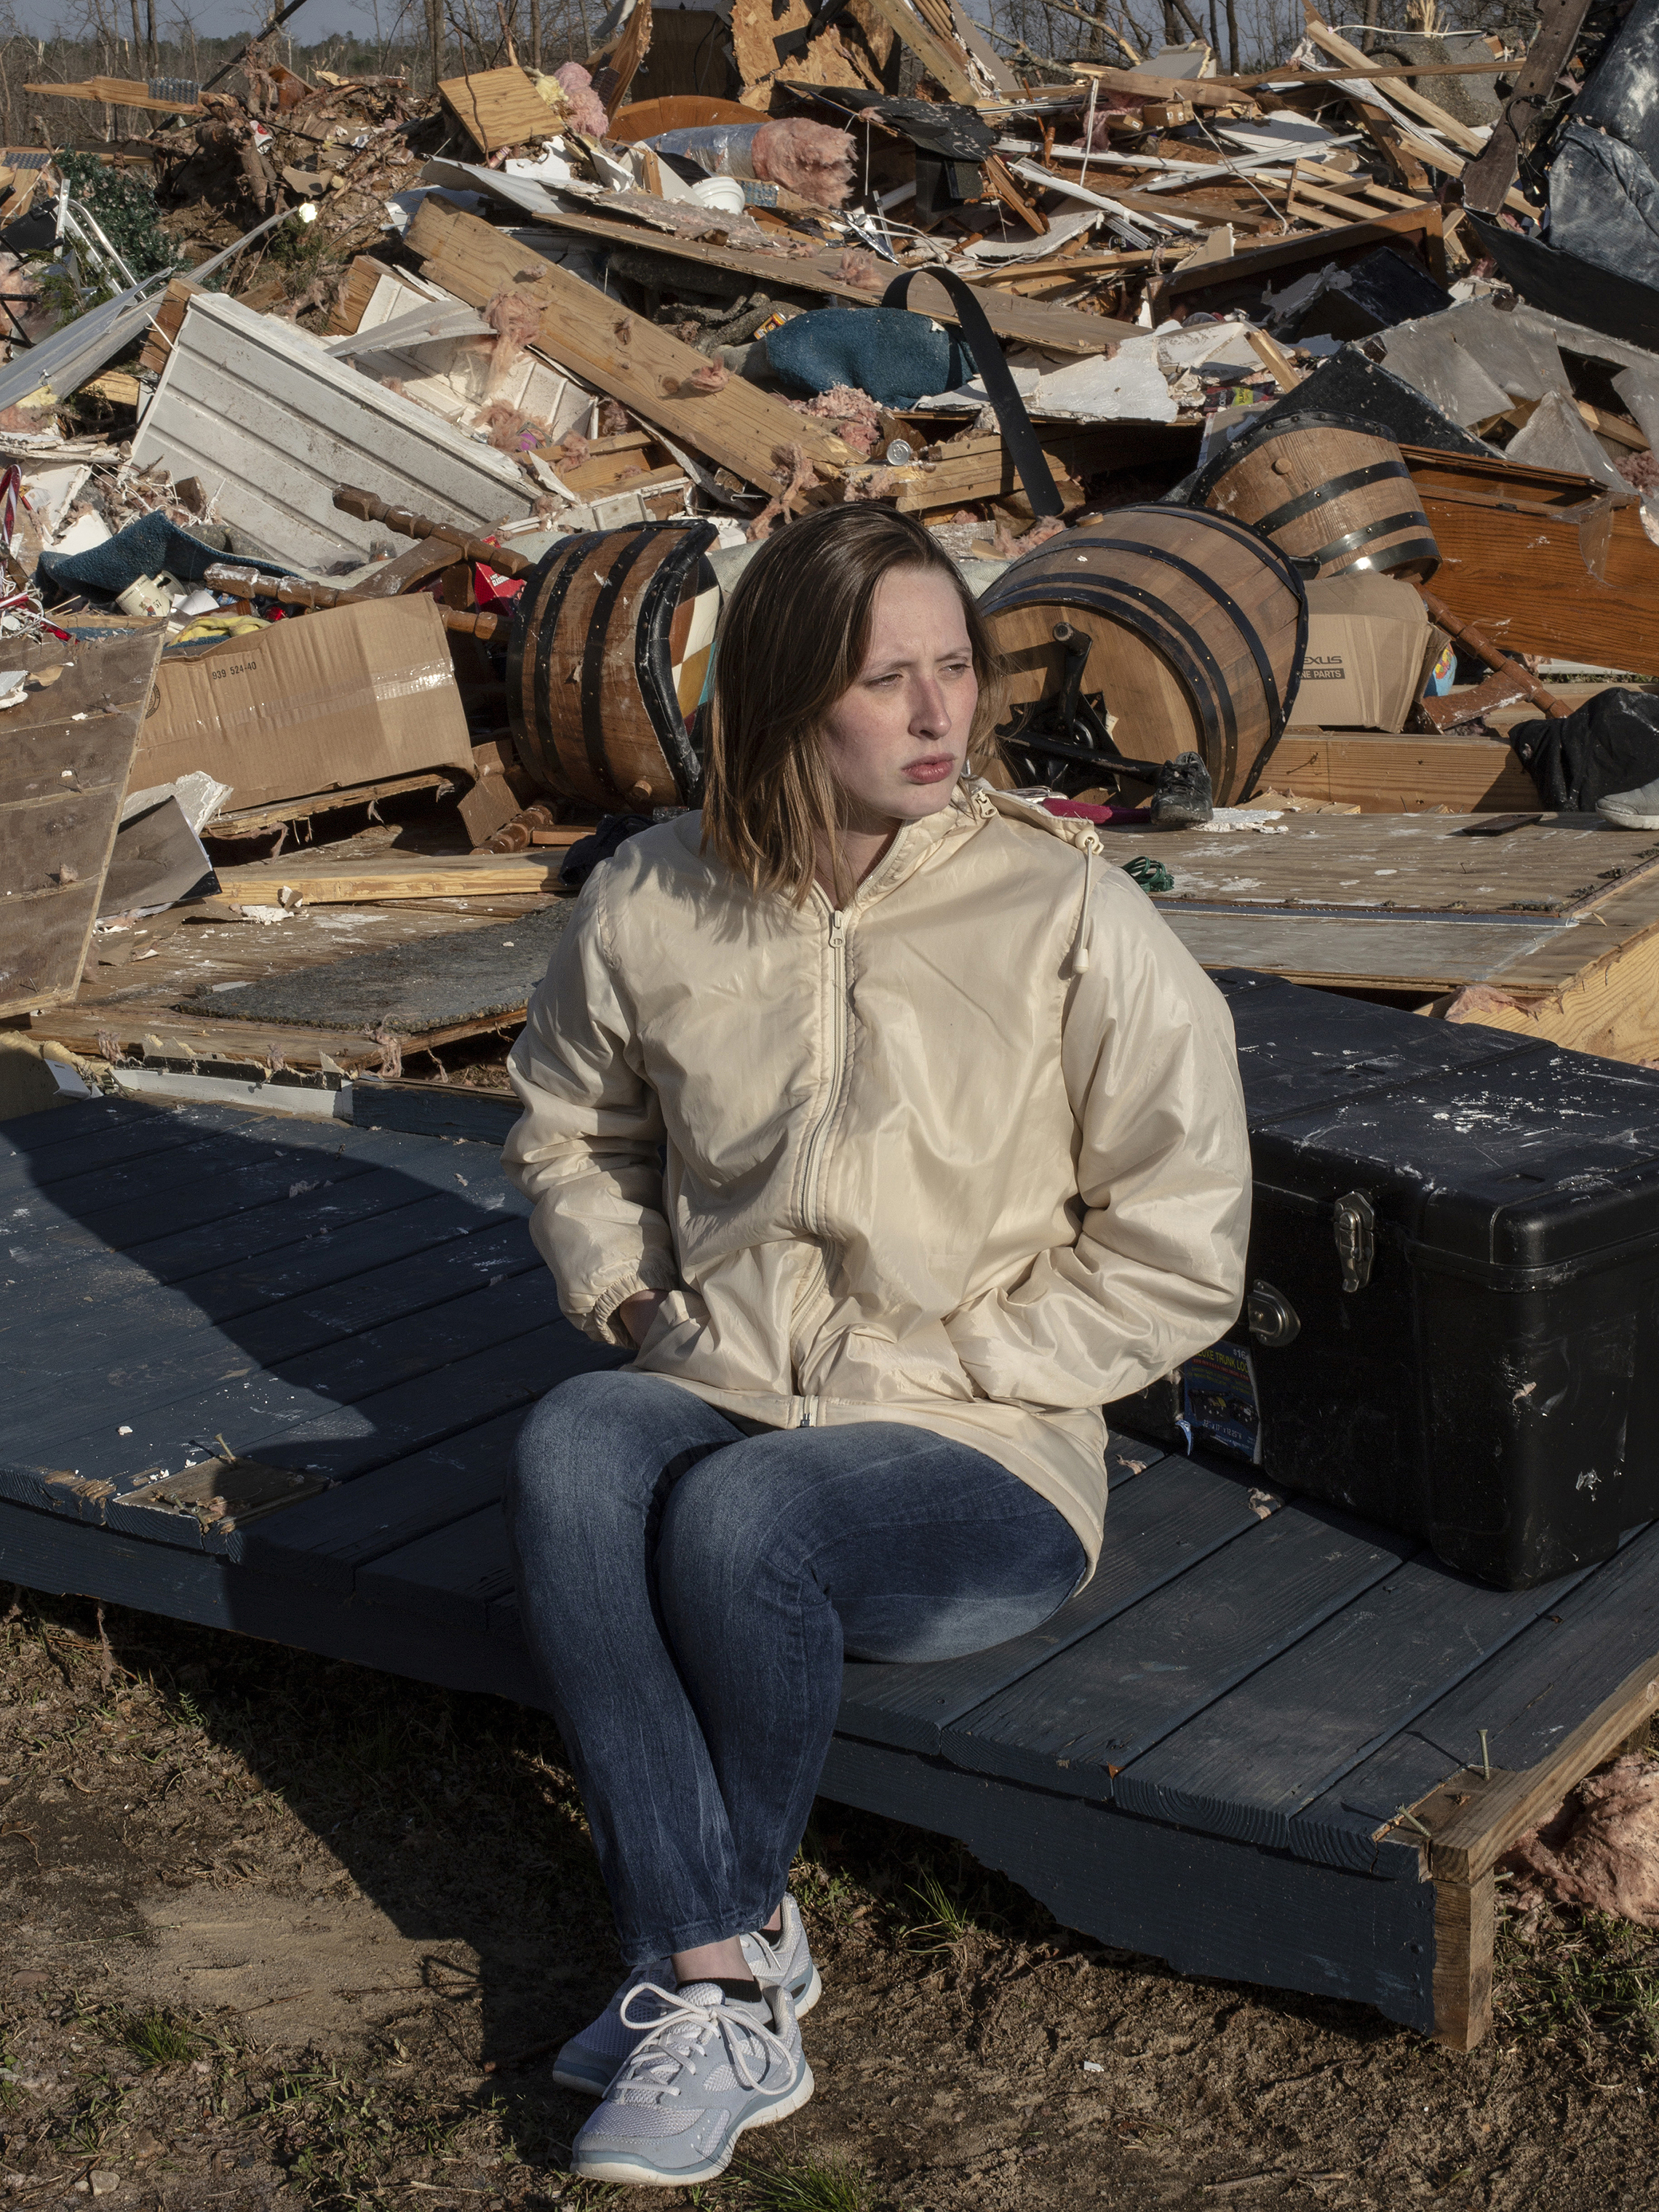 Jessica Chandler poses for a portrait in her neighborhood, which was destroyed after a tornado passed over killing 23 people and destroying homes in Beauregard, Alabama on March 4, 2019. (Bryan Anselm—Redux for TIME)